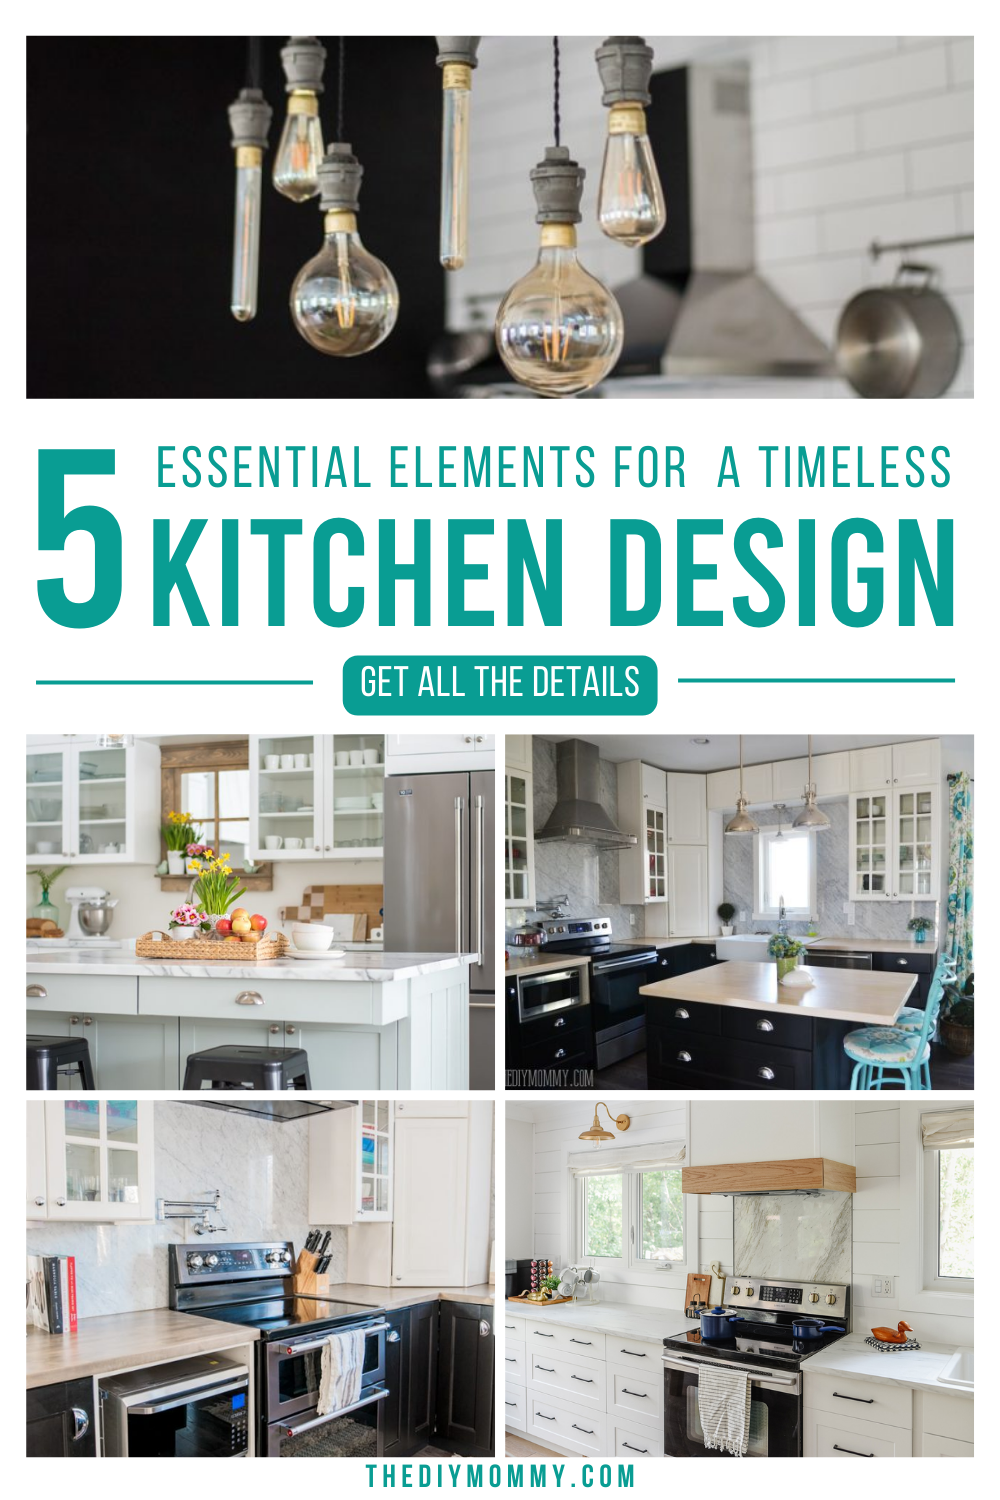 5 Essential Elements For A Timeless Kitchen Design (Examples Included)